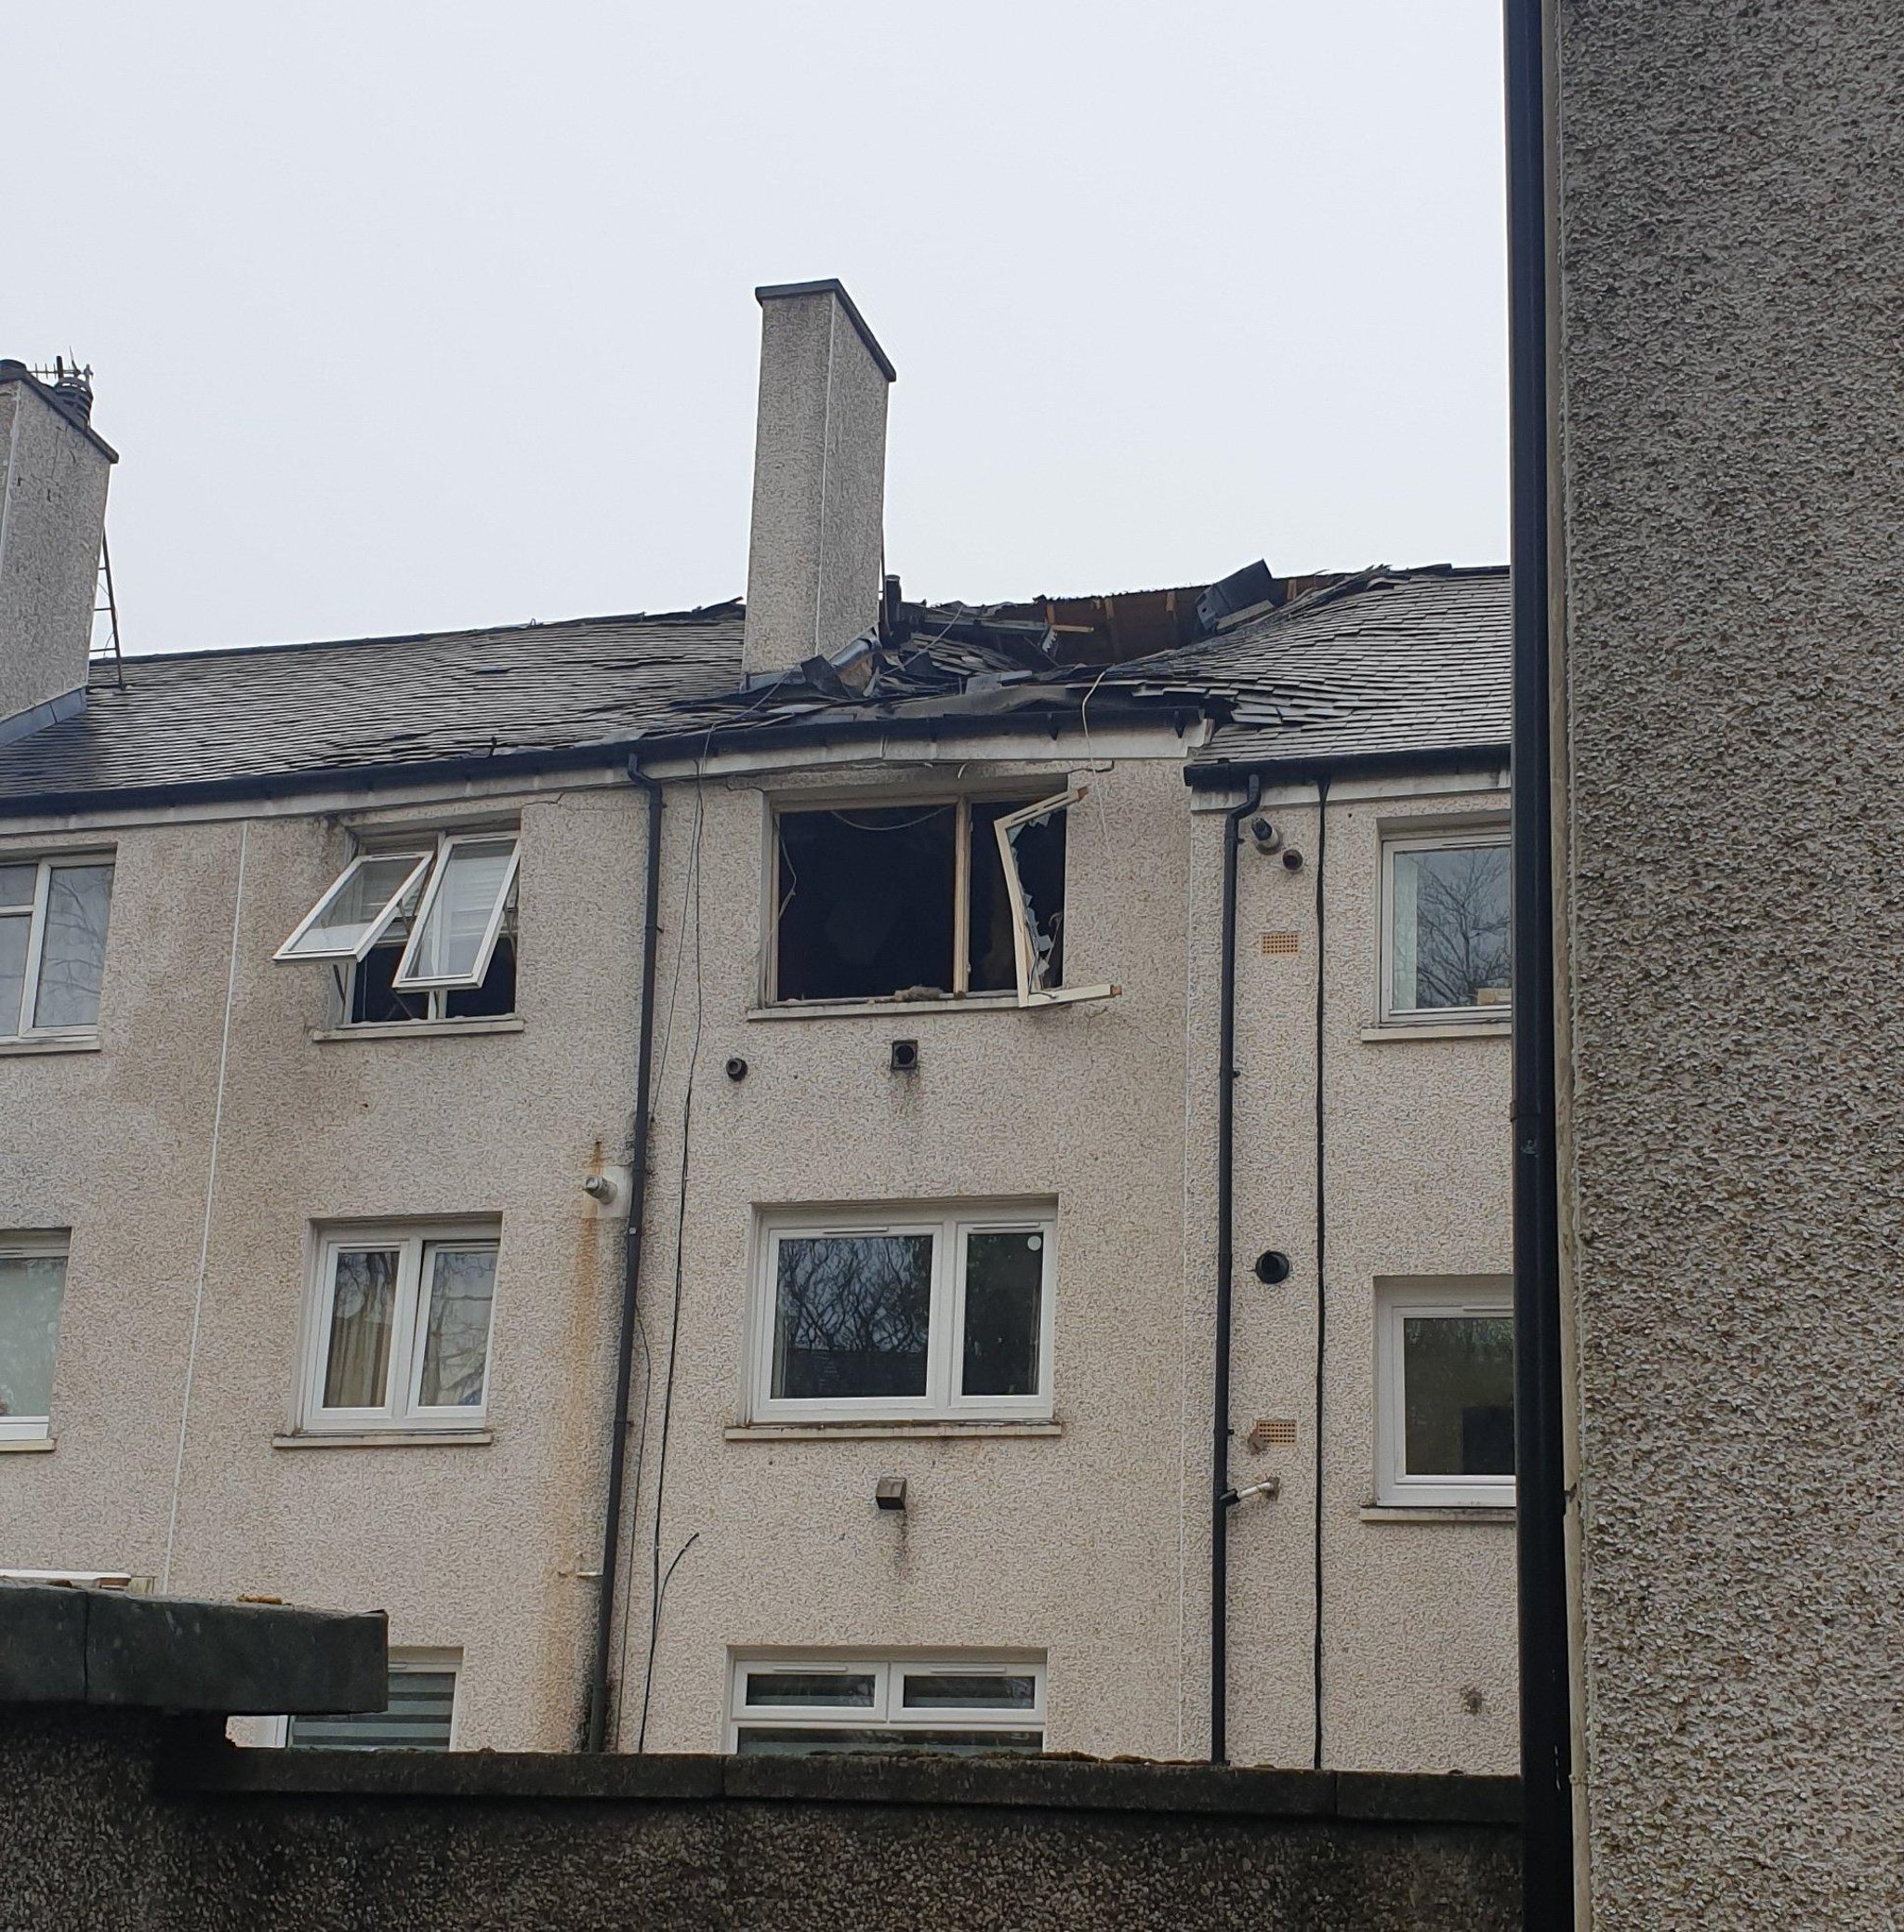 A 52-year-old man has been injured in a suspected gas explosion at a flat in South Lanarkshire